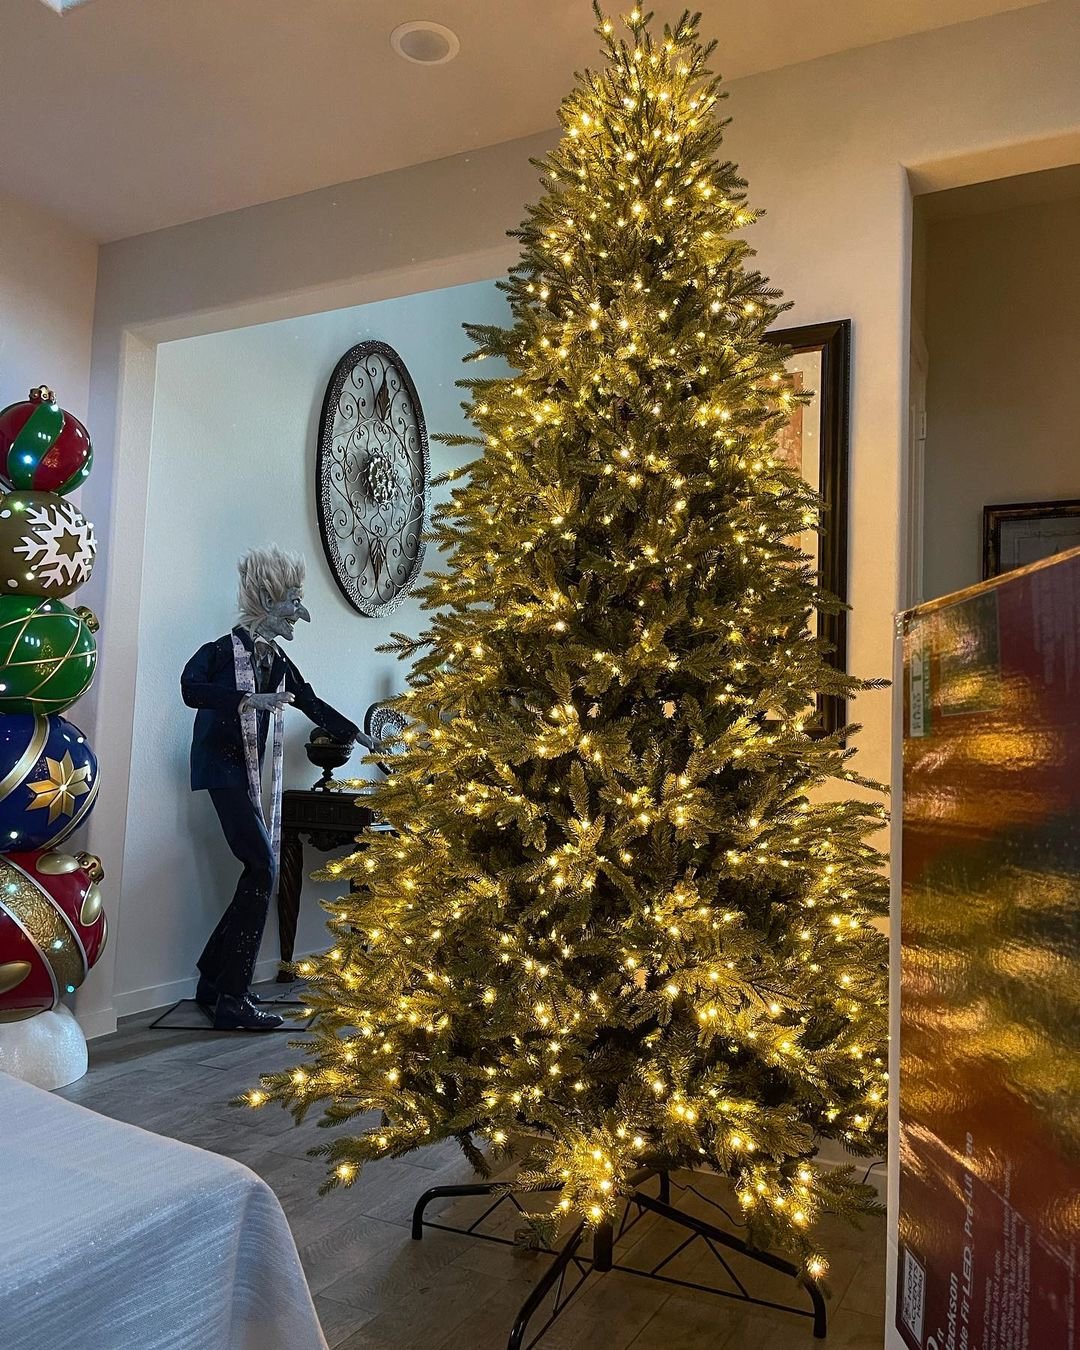 A Noble Fir Christmas tree in a living room, with a man standing in the background.